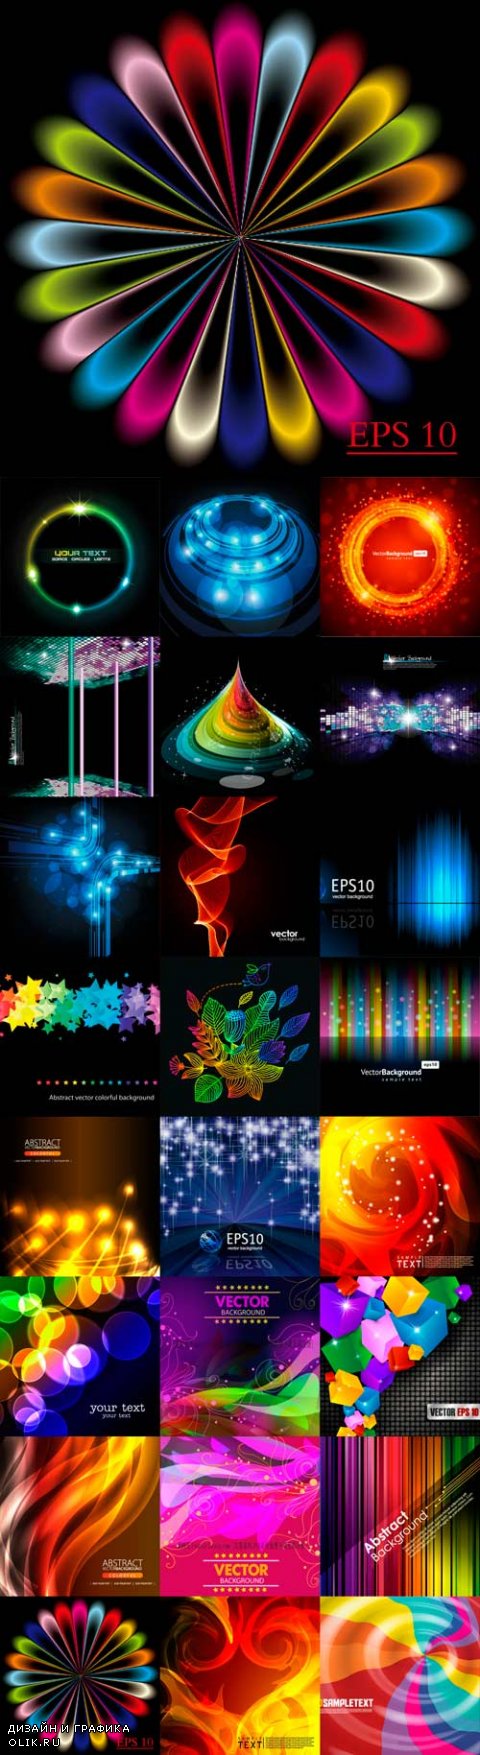 Bright colorful abstract backgrounds vector -43